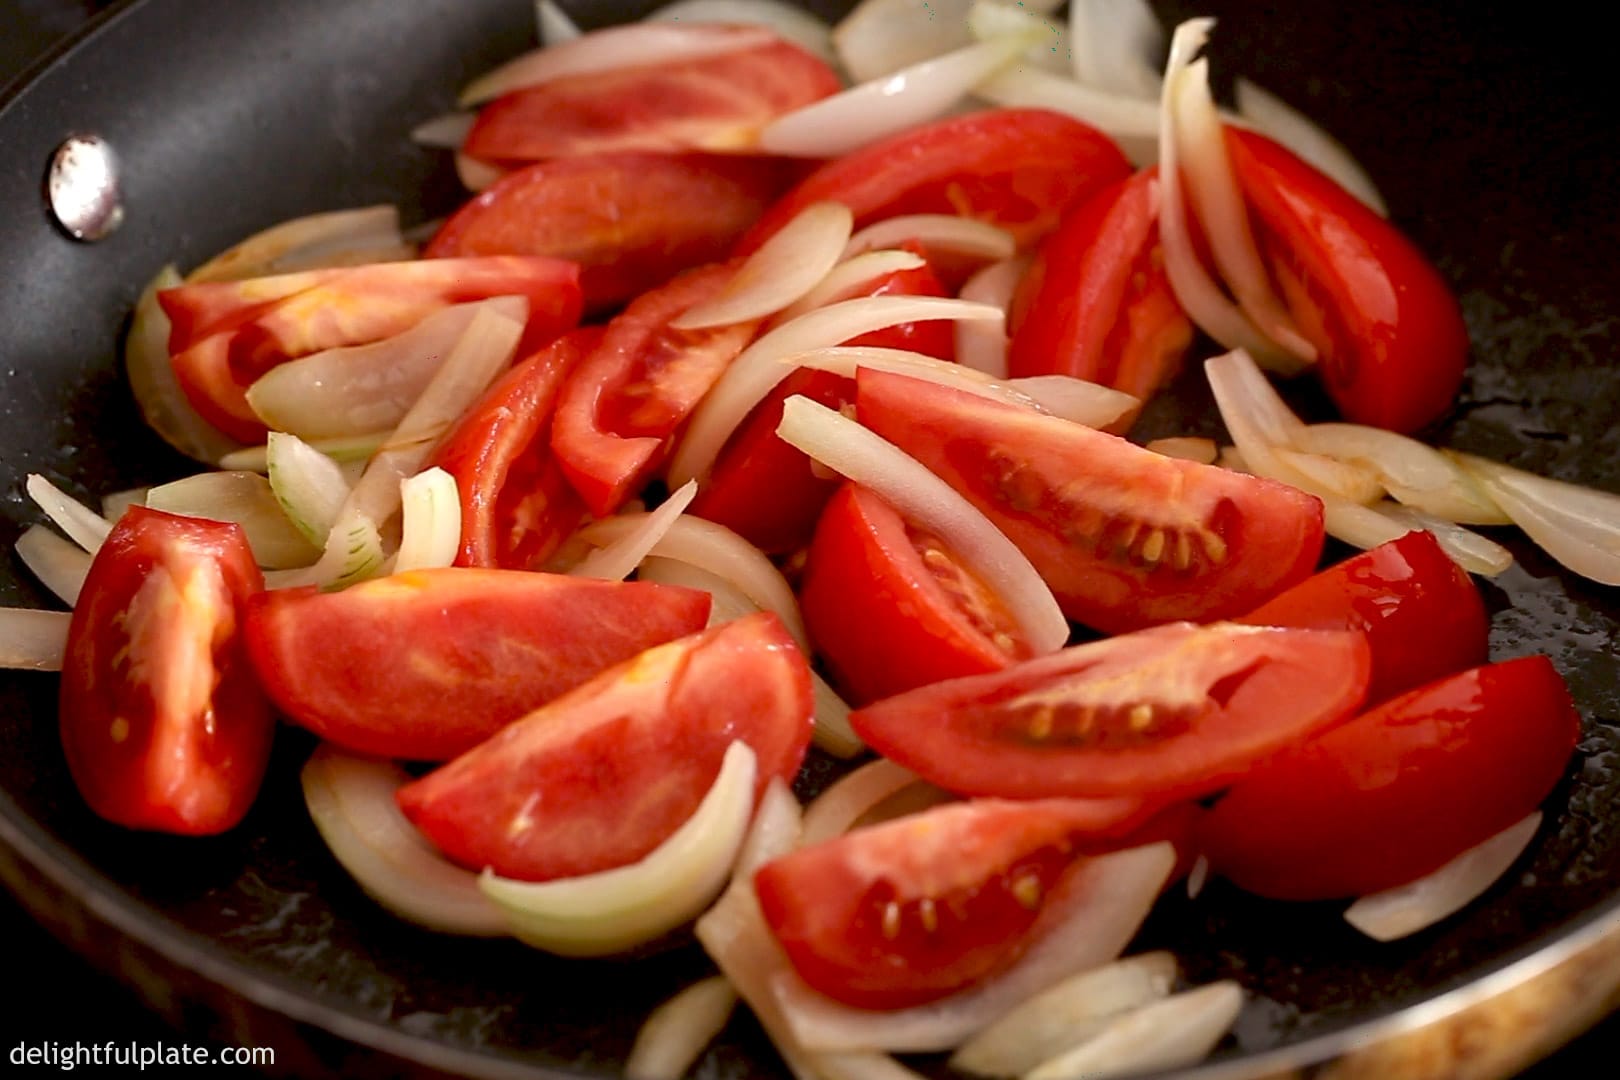 tomato wedges and onions are being sautéed in a skillet